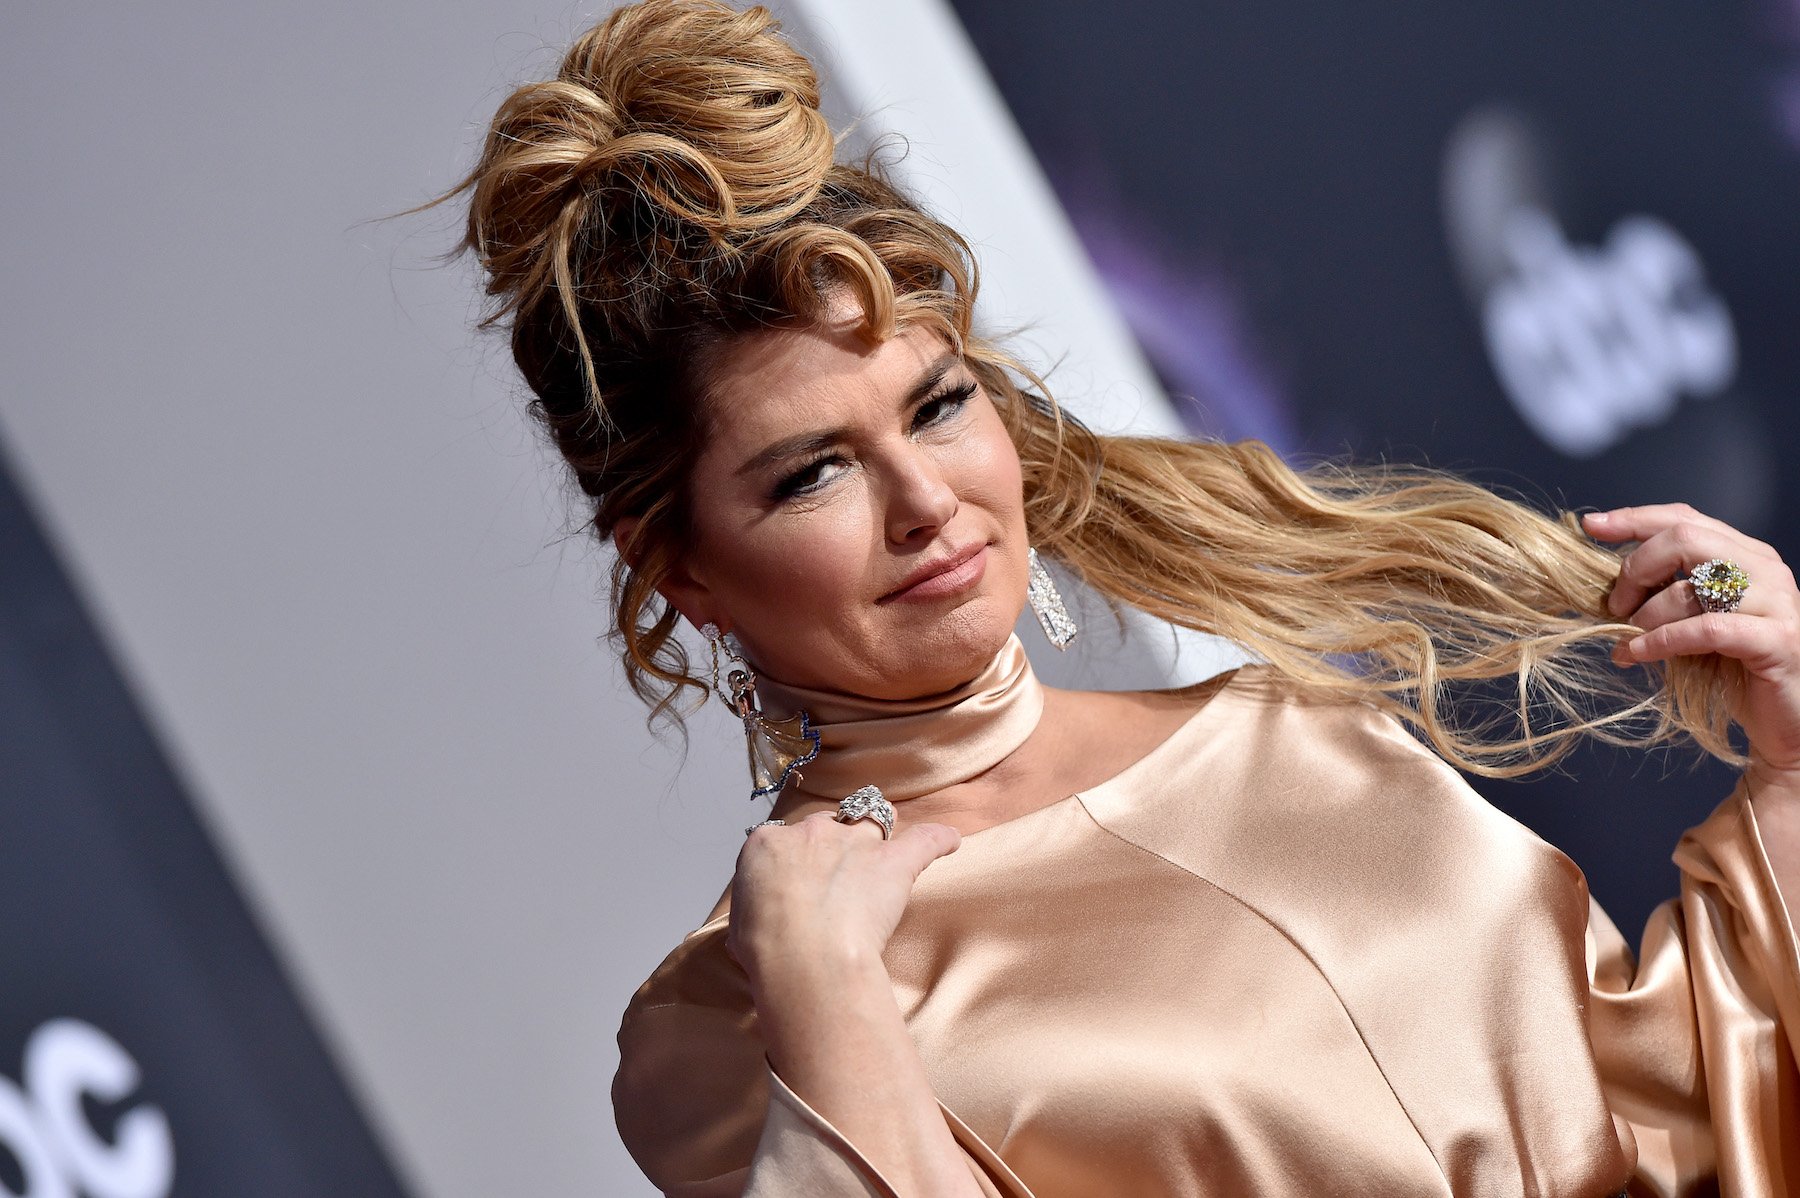 Shania Twain Went Topless For Her New Single ‘Waking Up Dreaming’: ‘This Is a Statement of Being Comfortable in My Own Skin’